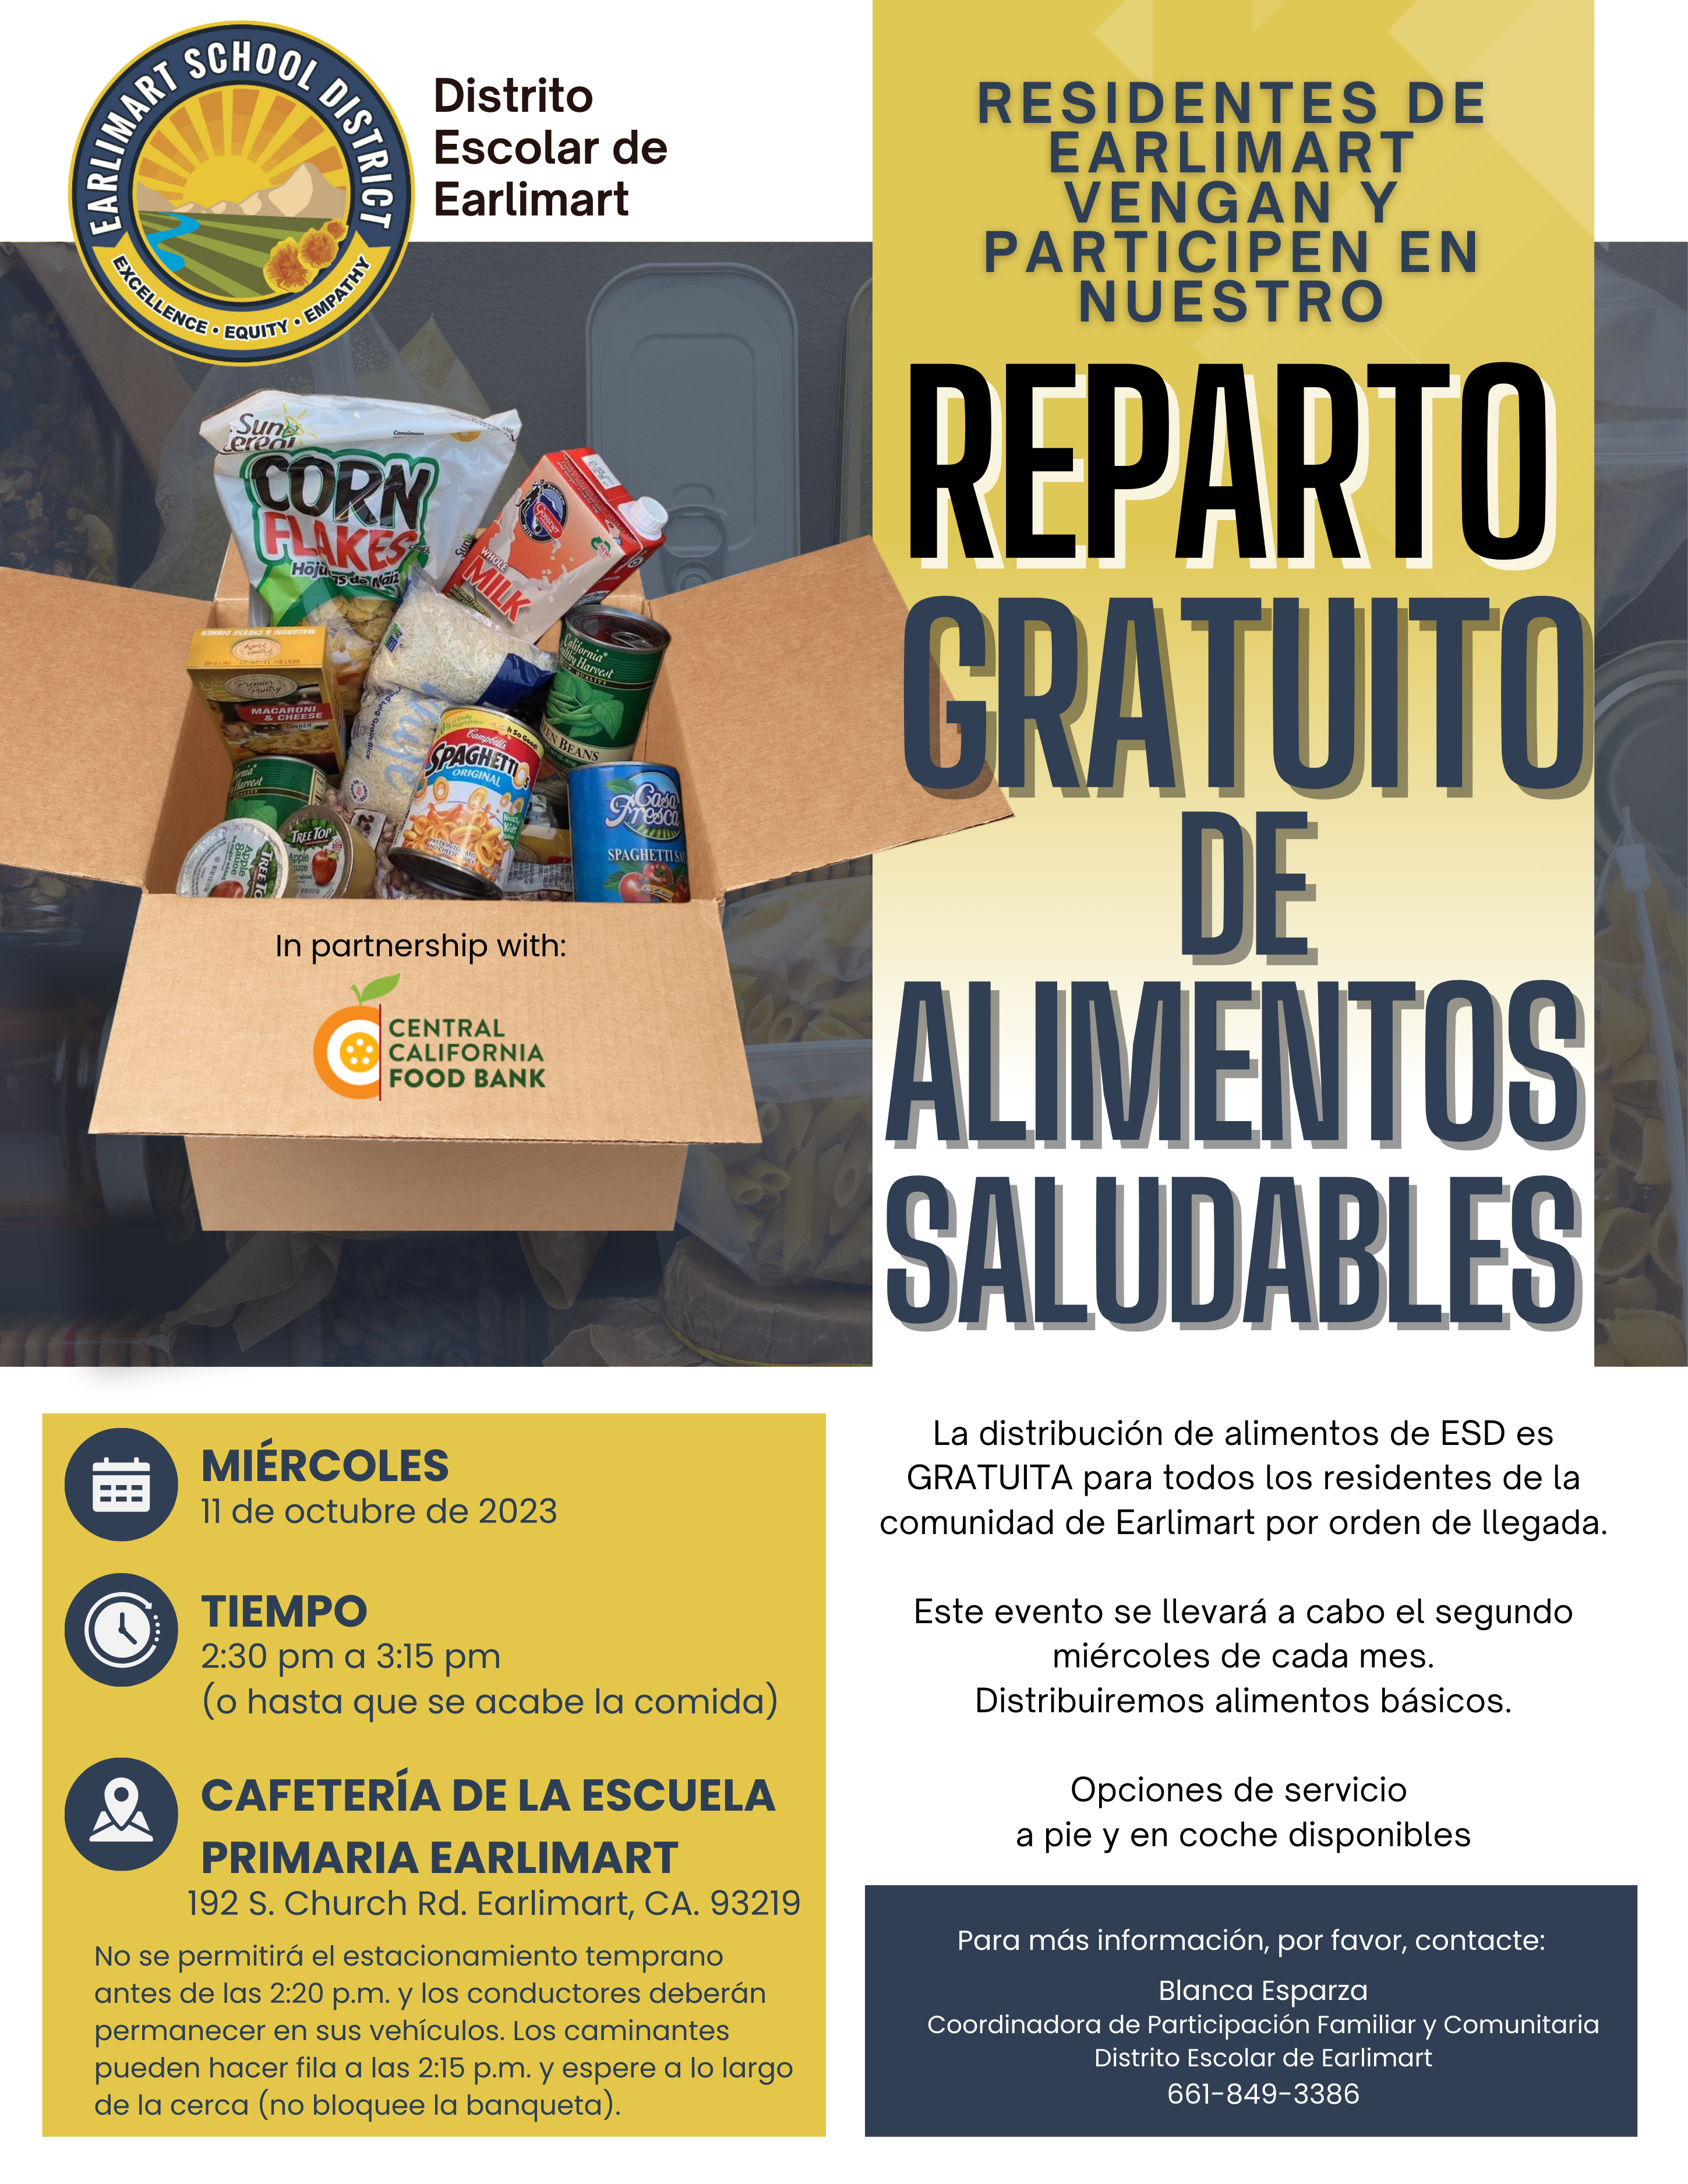 ESD logo, Box with food staples, information on free food distribution (all information in article) Spanish version